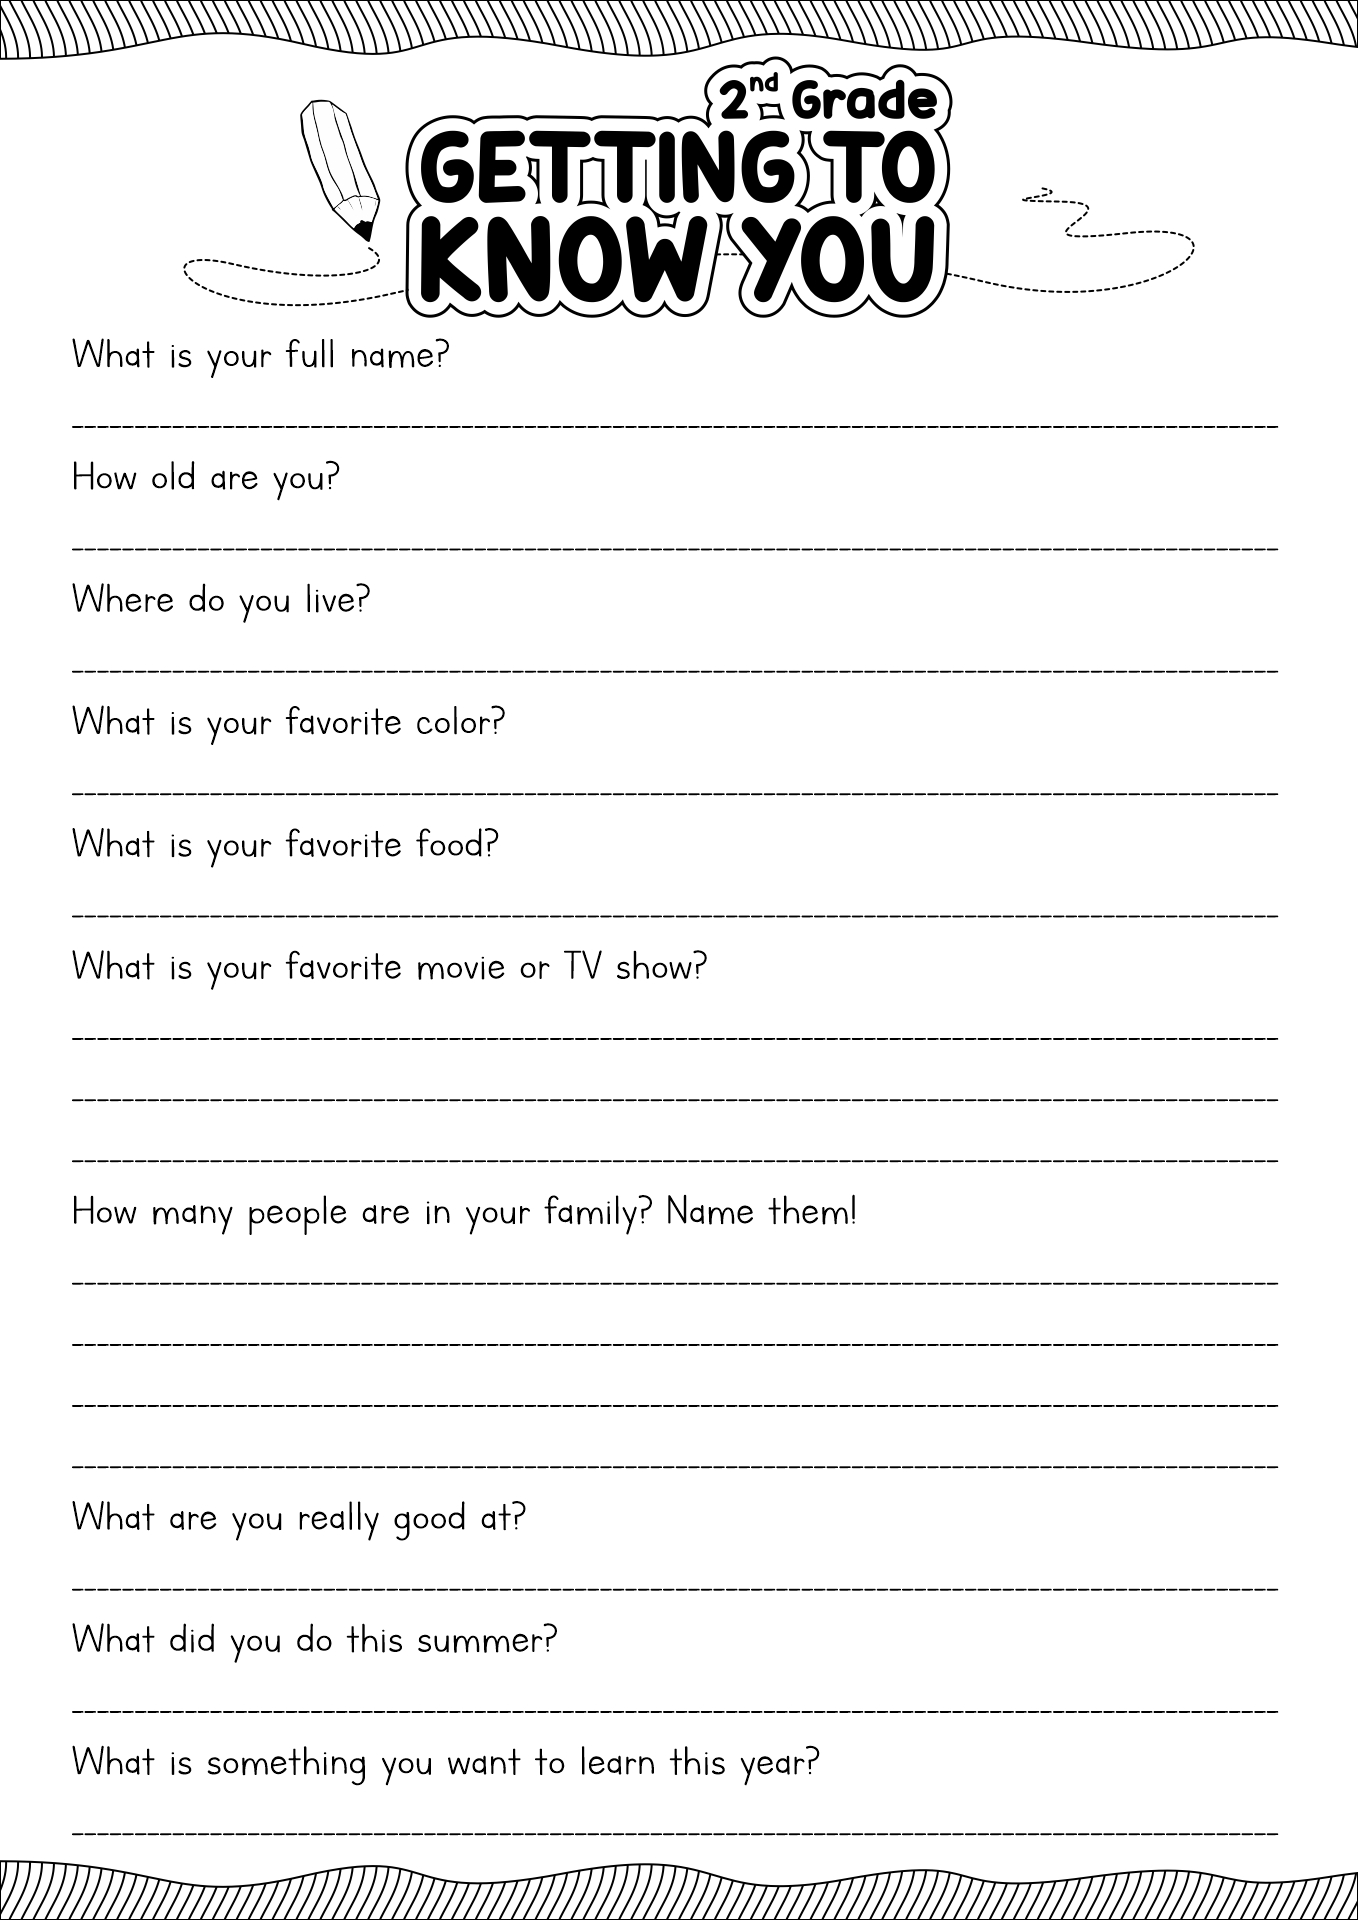 10 Getting To Know You Questions Printable